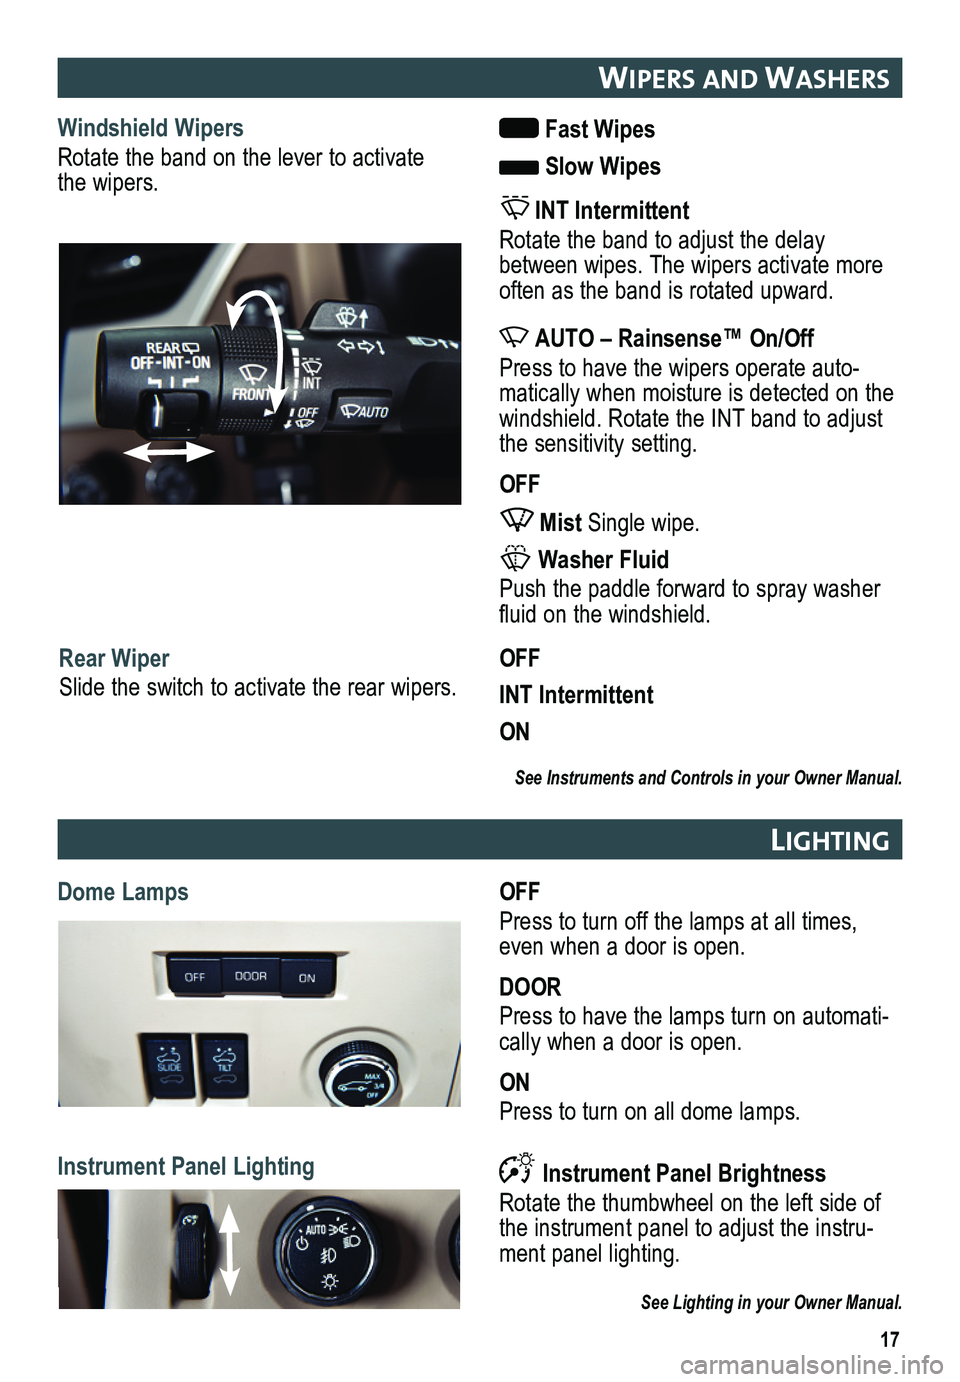 GMC YUKON 2015  Get To Know Guide 17
wIPers anD washers
Windshield Wipers
Rotate the band on the lever to activate the wipers.
 Fast Wipes
 Slow Wipes 
 INT Intermittent
Rotate the band to adjust the delay between wipes. The   wipers 